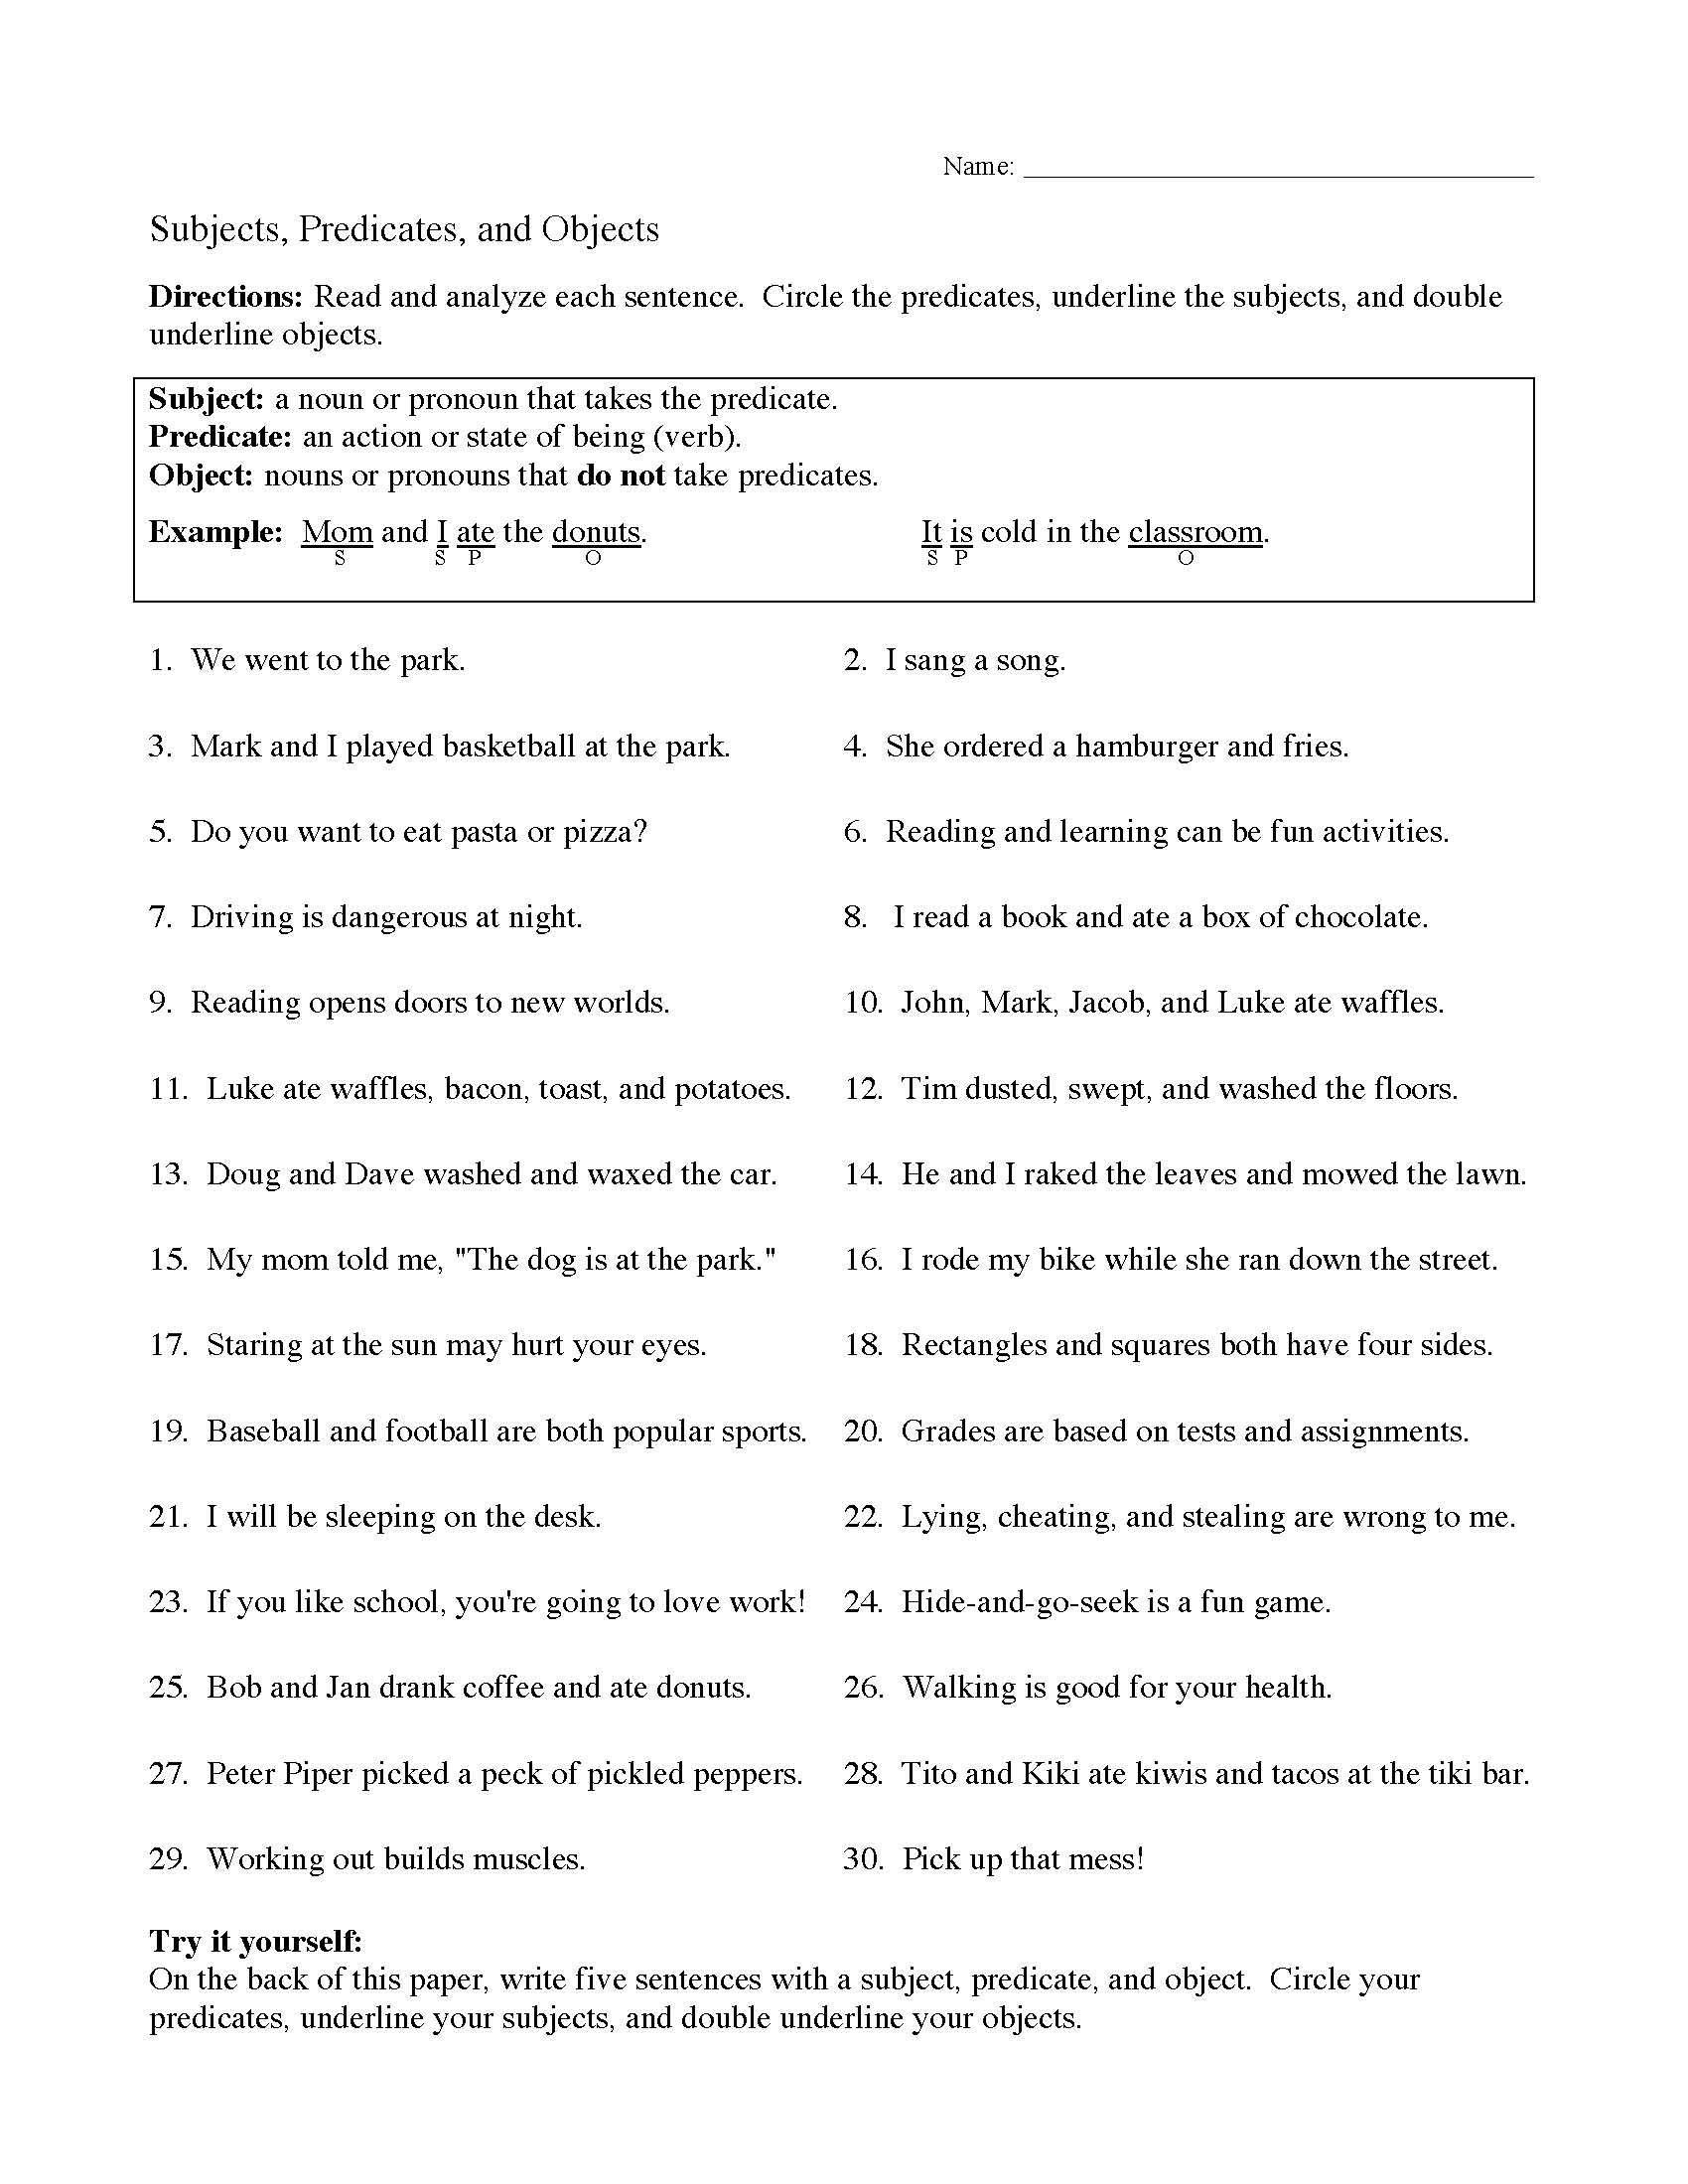 subject-object-study-worksheet-common-core